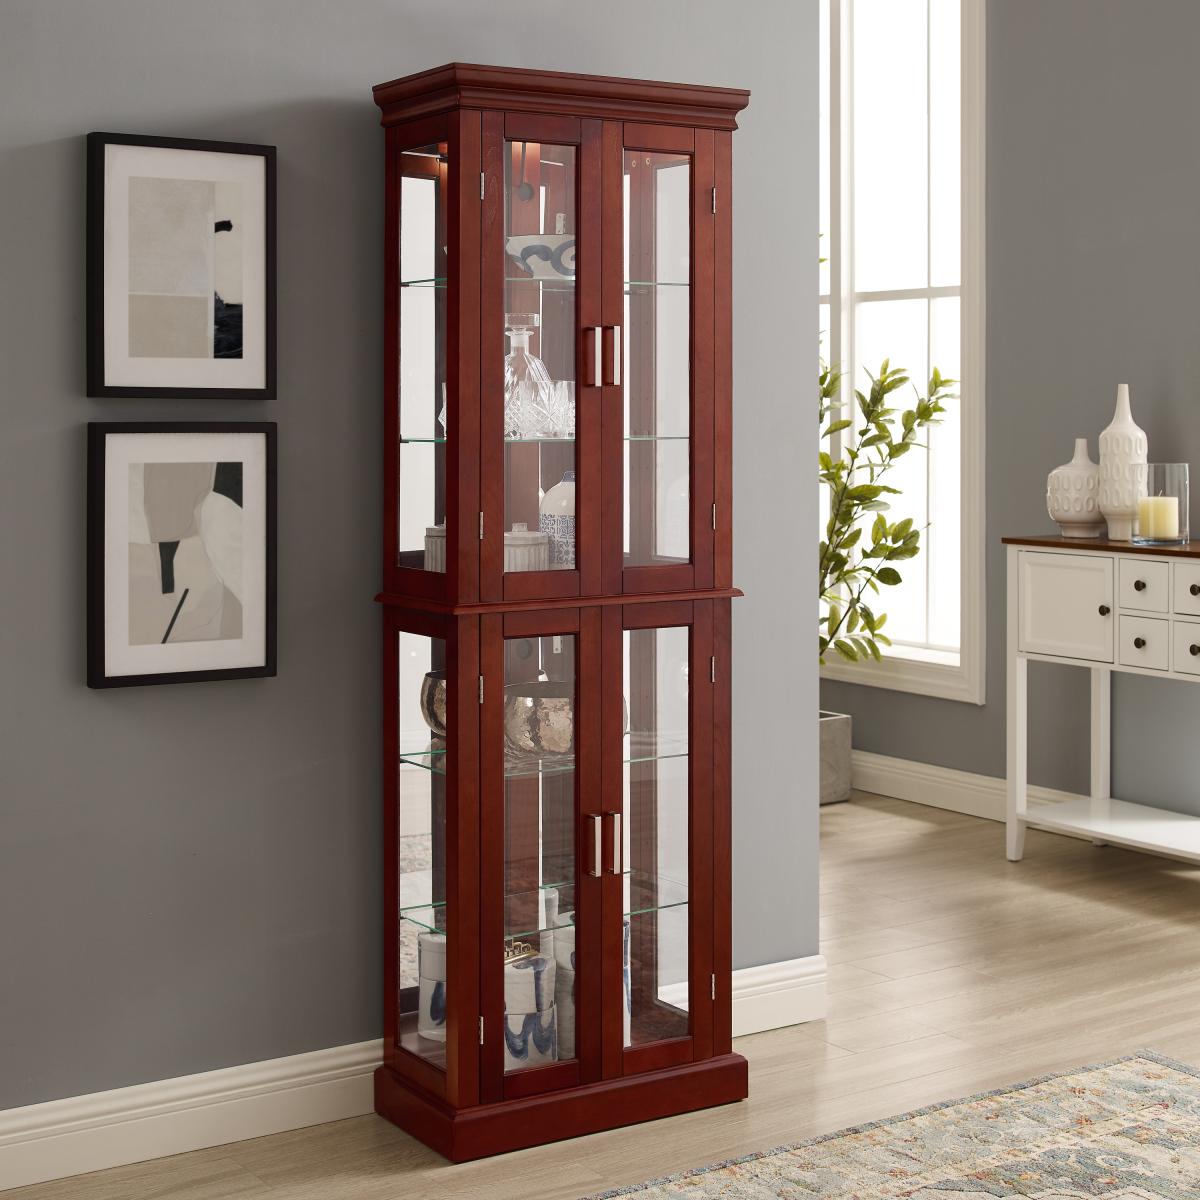 Curio Cabinet Lighted Curio Diapaly Cabinet with Adjustable Shelves and Mirrored Back Panel, Tempered Glass Doors (Walnut, 6 Tier), (e26 light bulb not included)